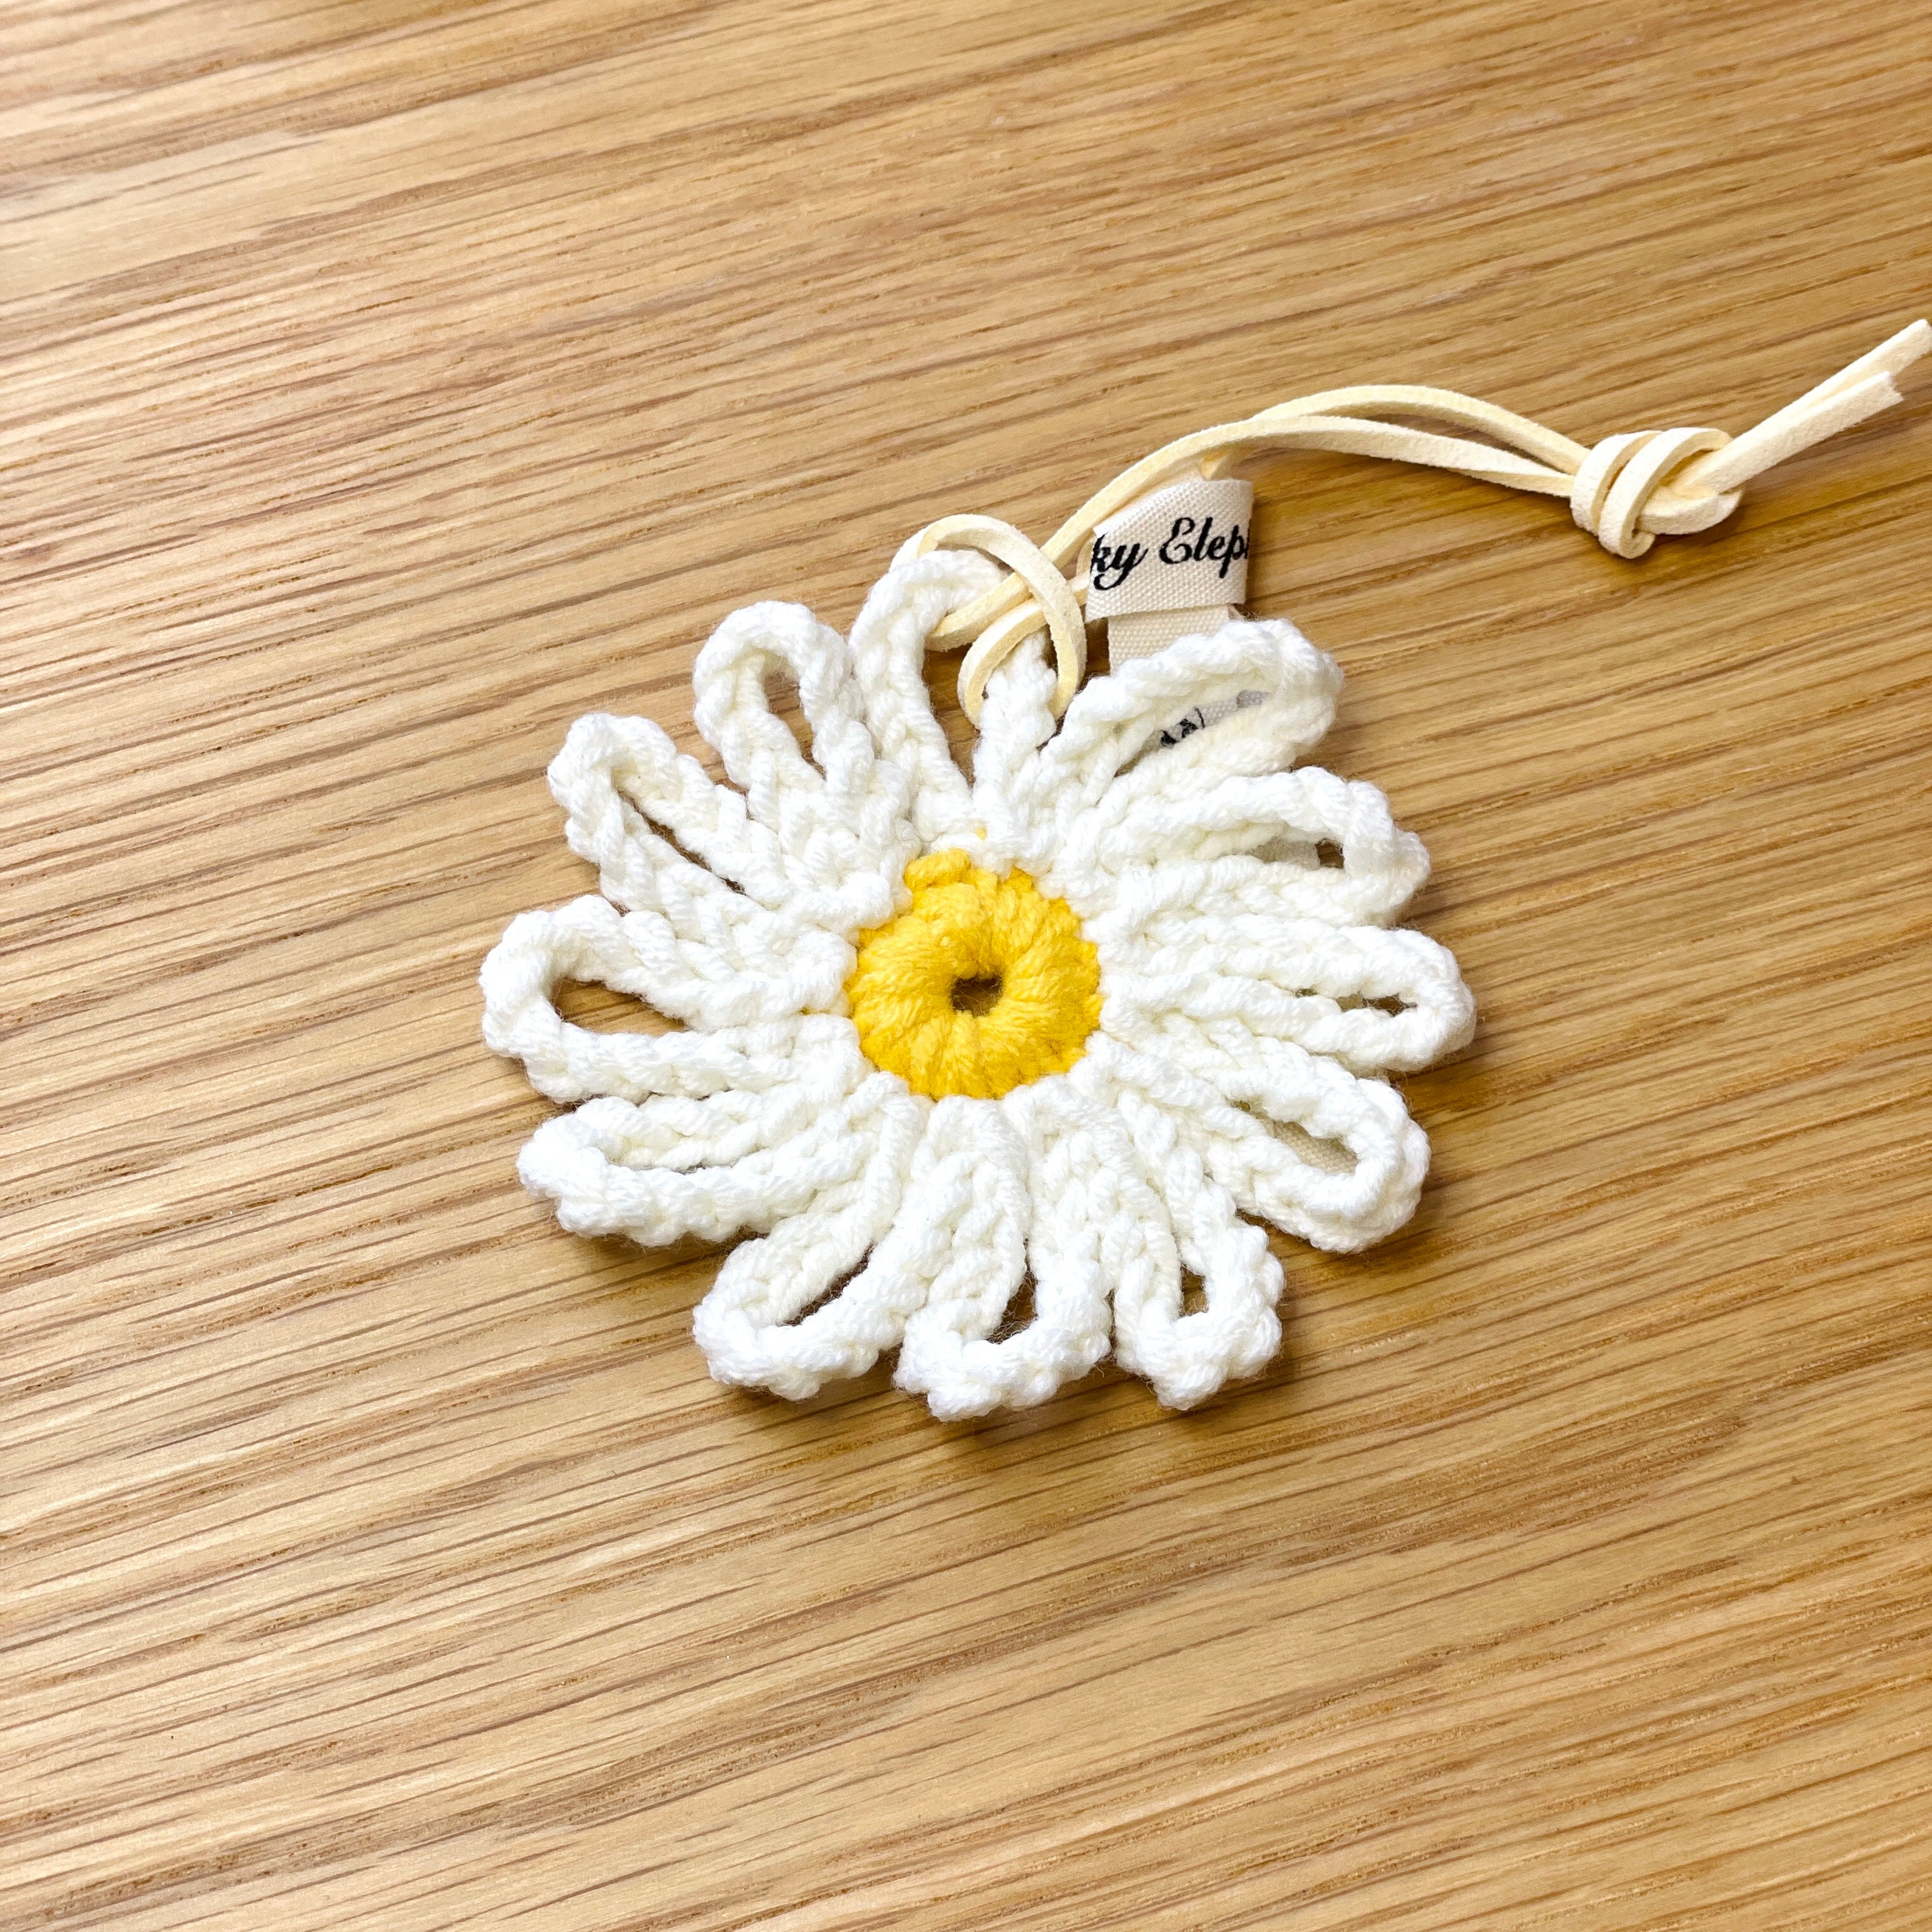 Daisy Clip Book Mark Journal Clip Very Cute Page Marker